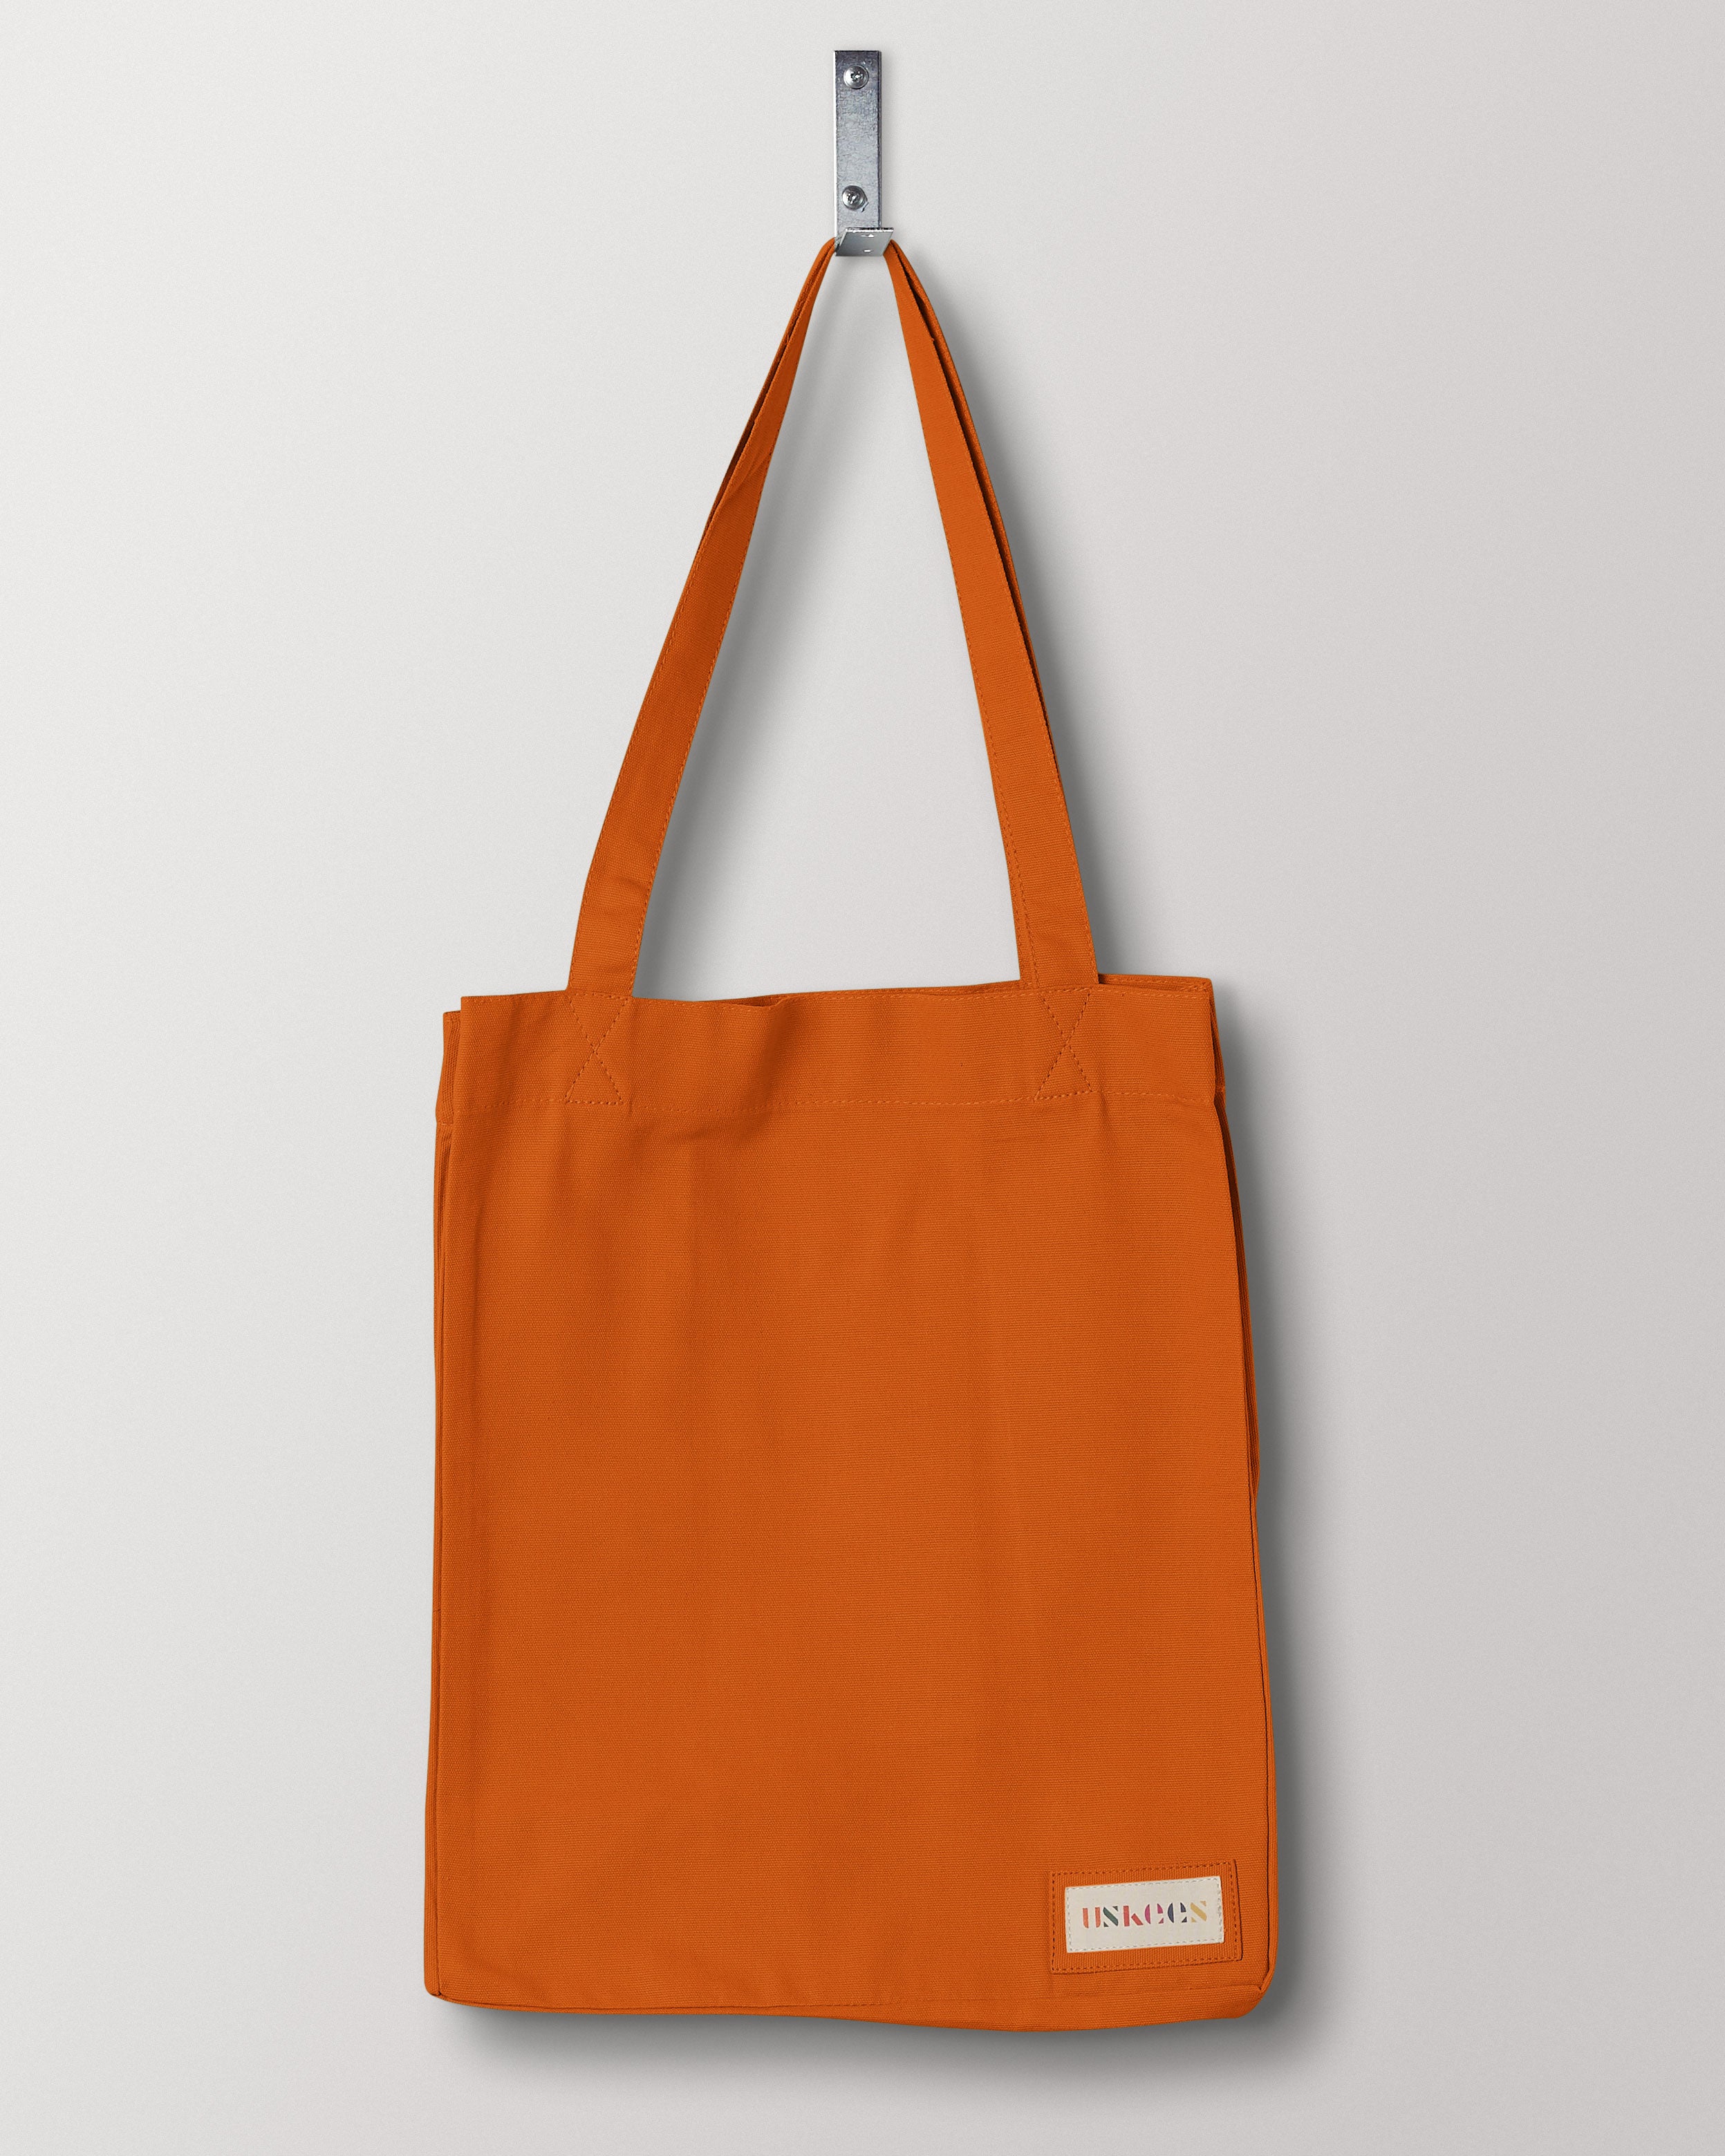 FCRB 23SS SMALL TOTE BAG - ファッション